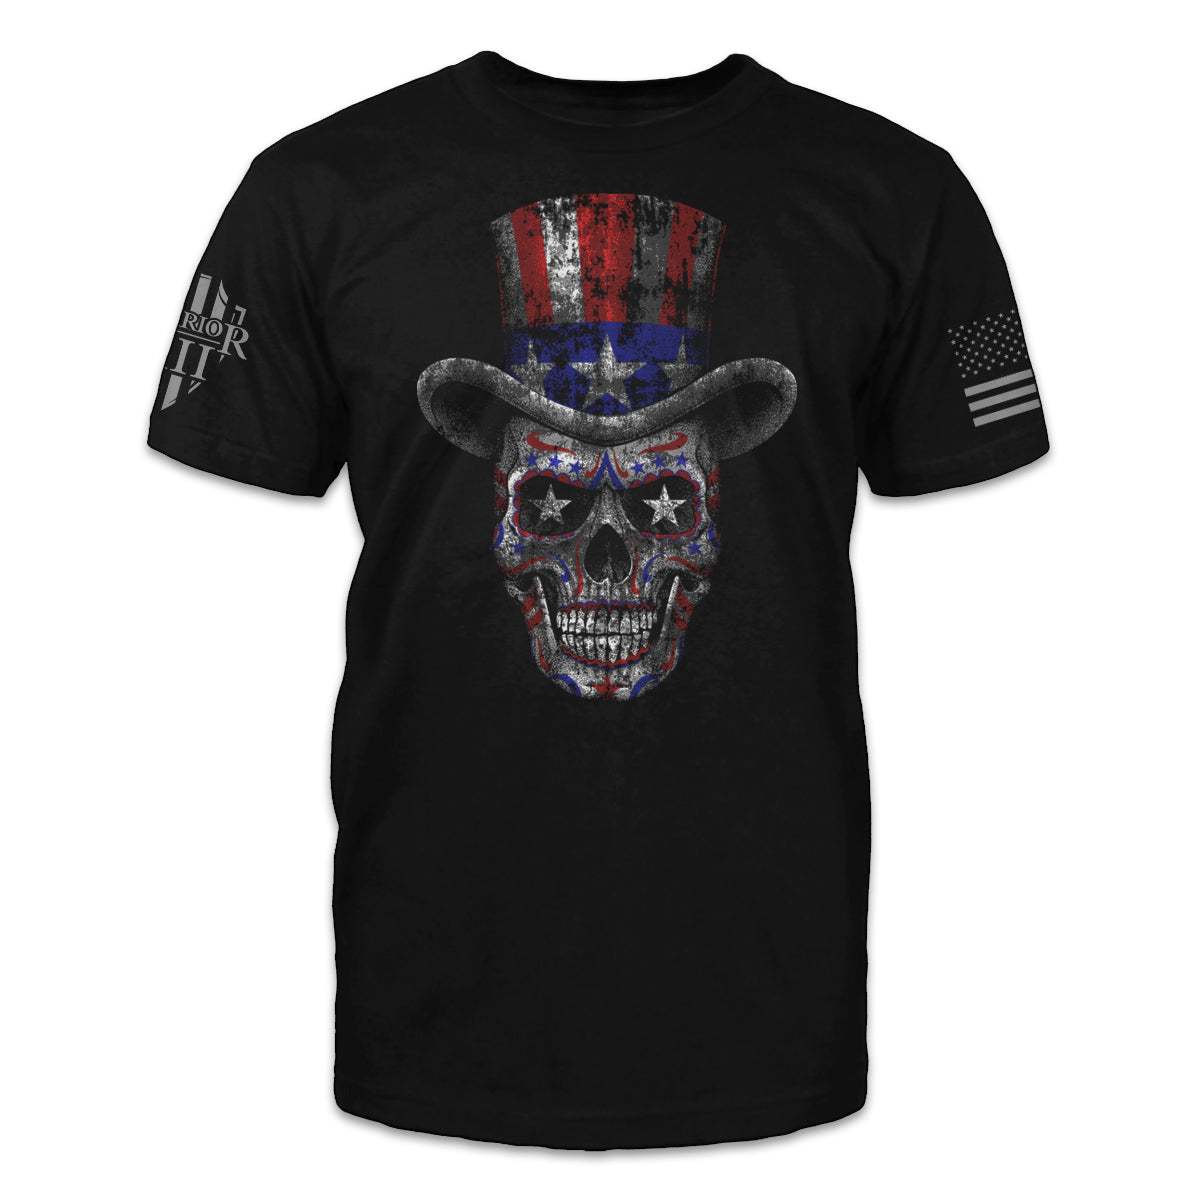 A black t-shirt with a skeleton and hat with the American flag printed on the front.